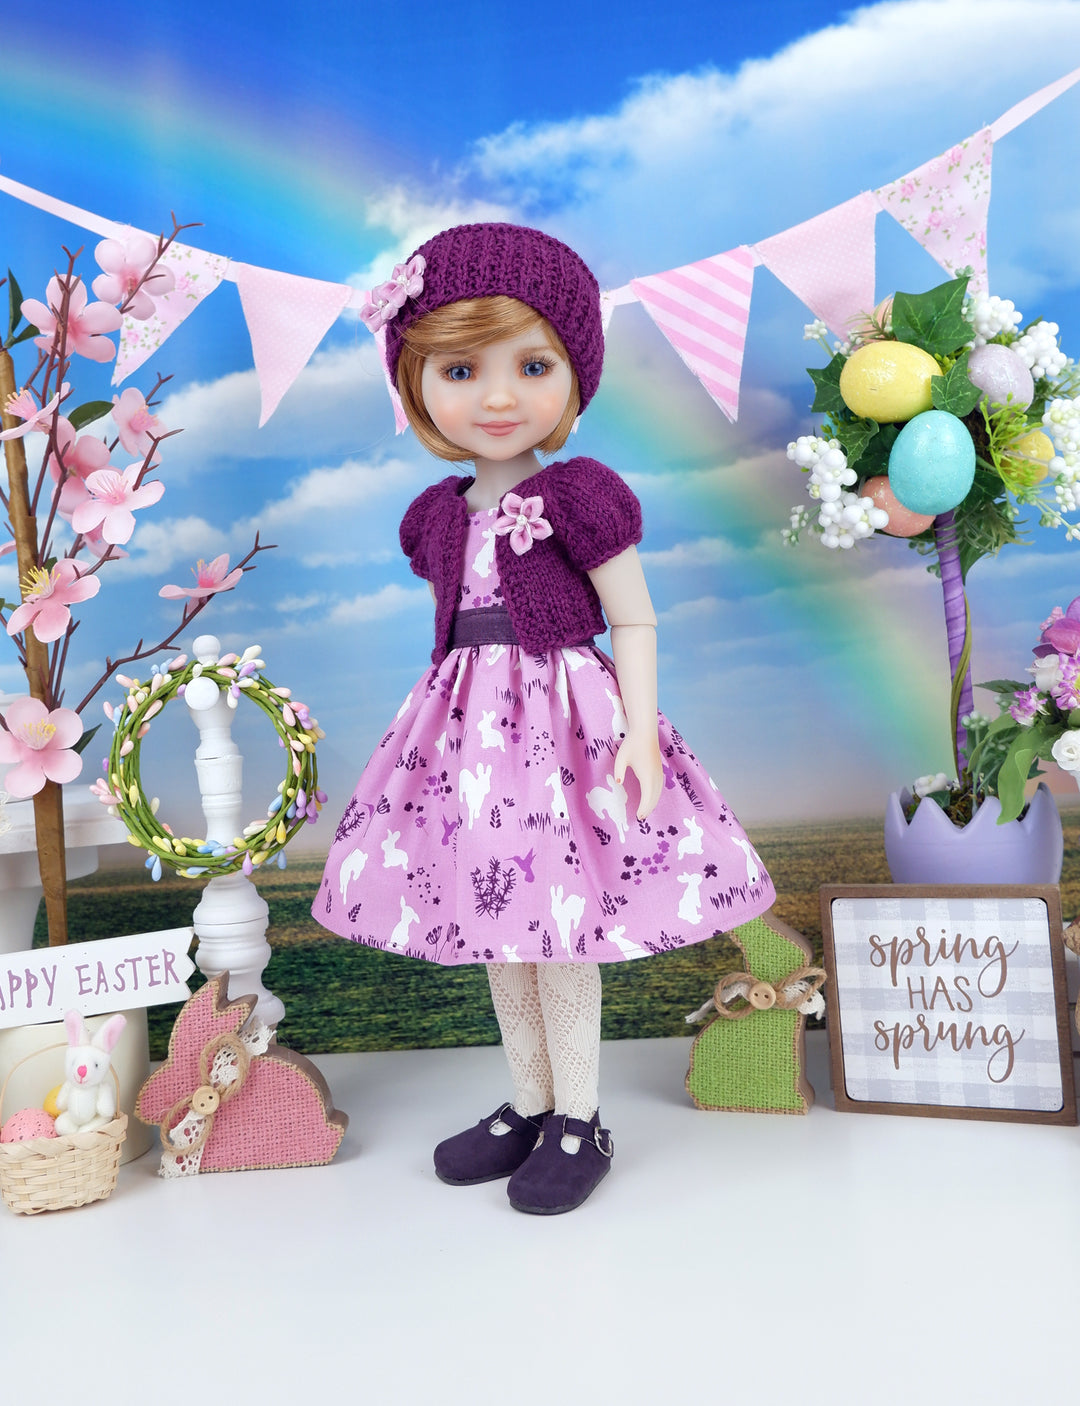 Beautiful Bunny - dress and sweater set with shoes for Ruby Red Fashion Friends doll